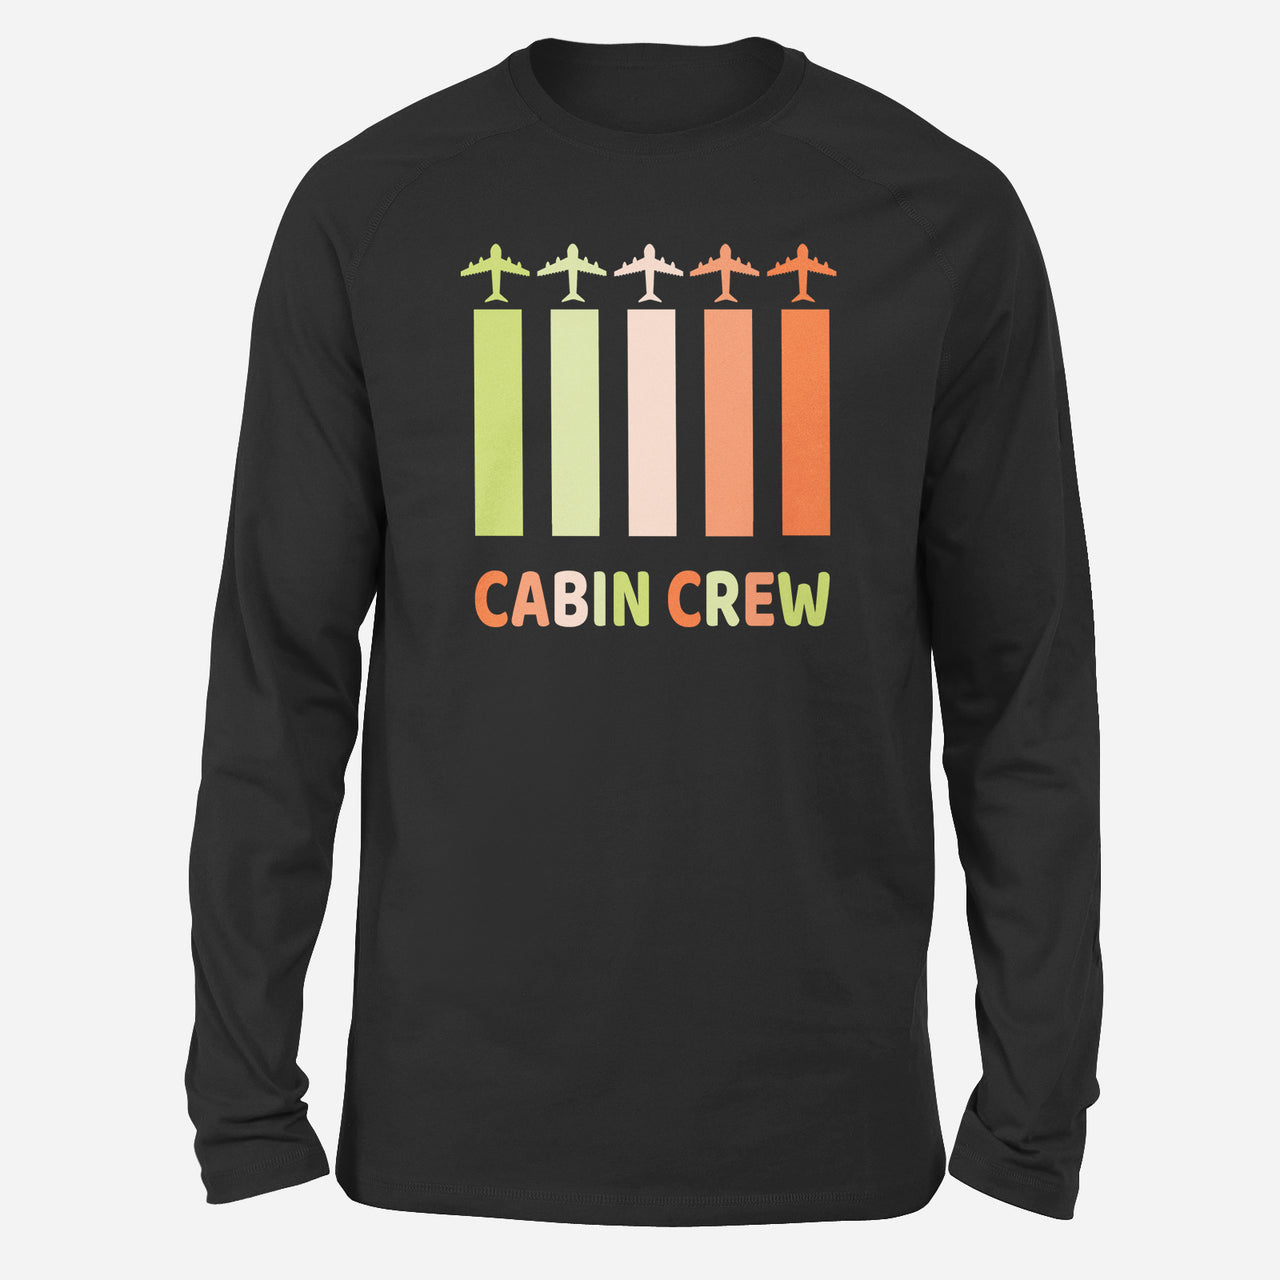 Colourful Cabin Crew Designed Long-Sleeve T-Shirts